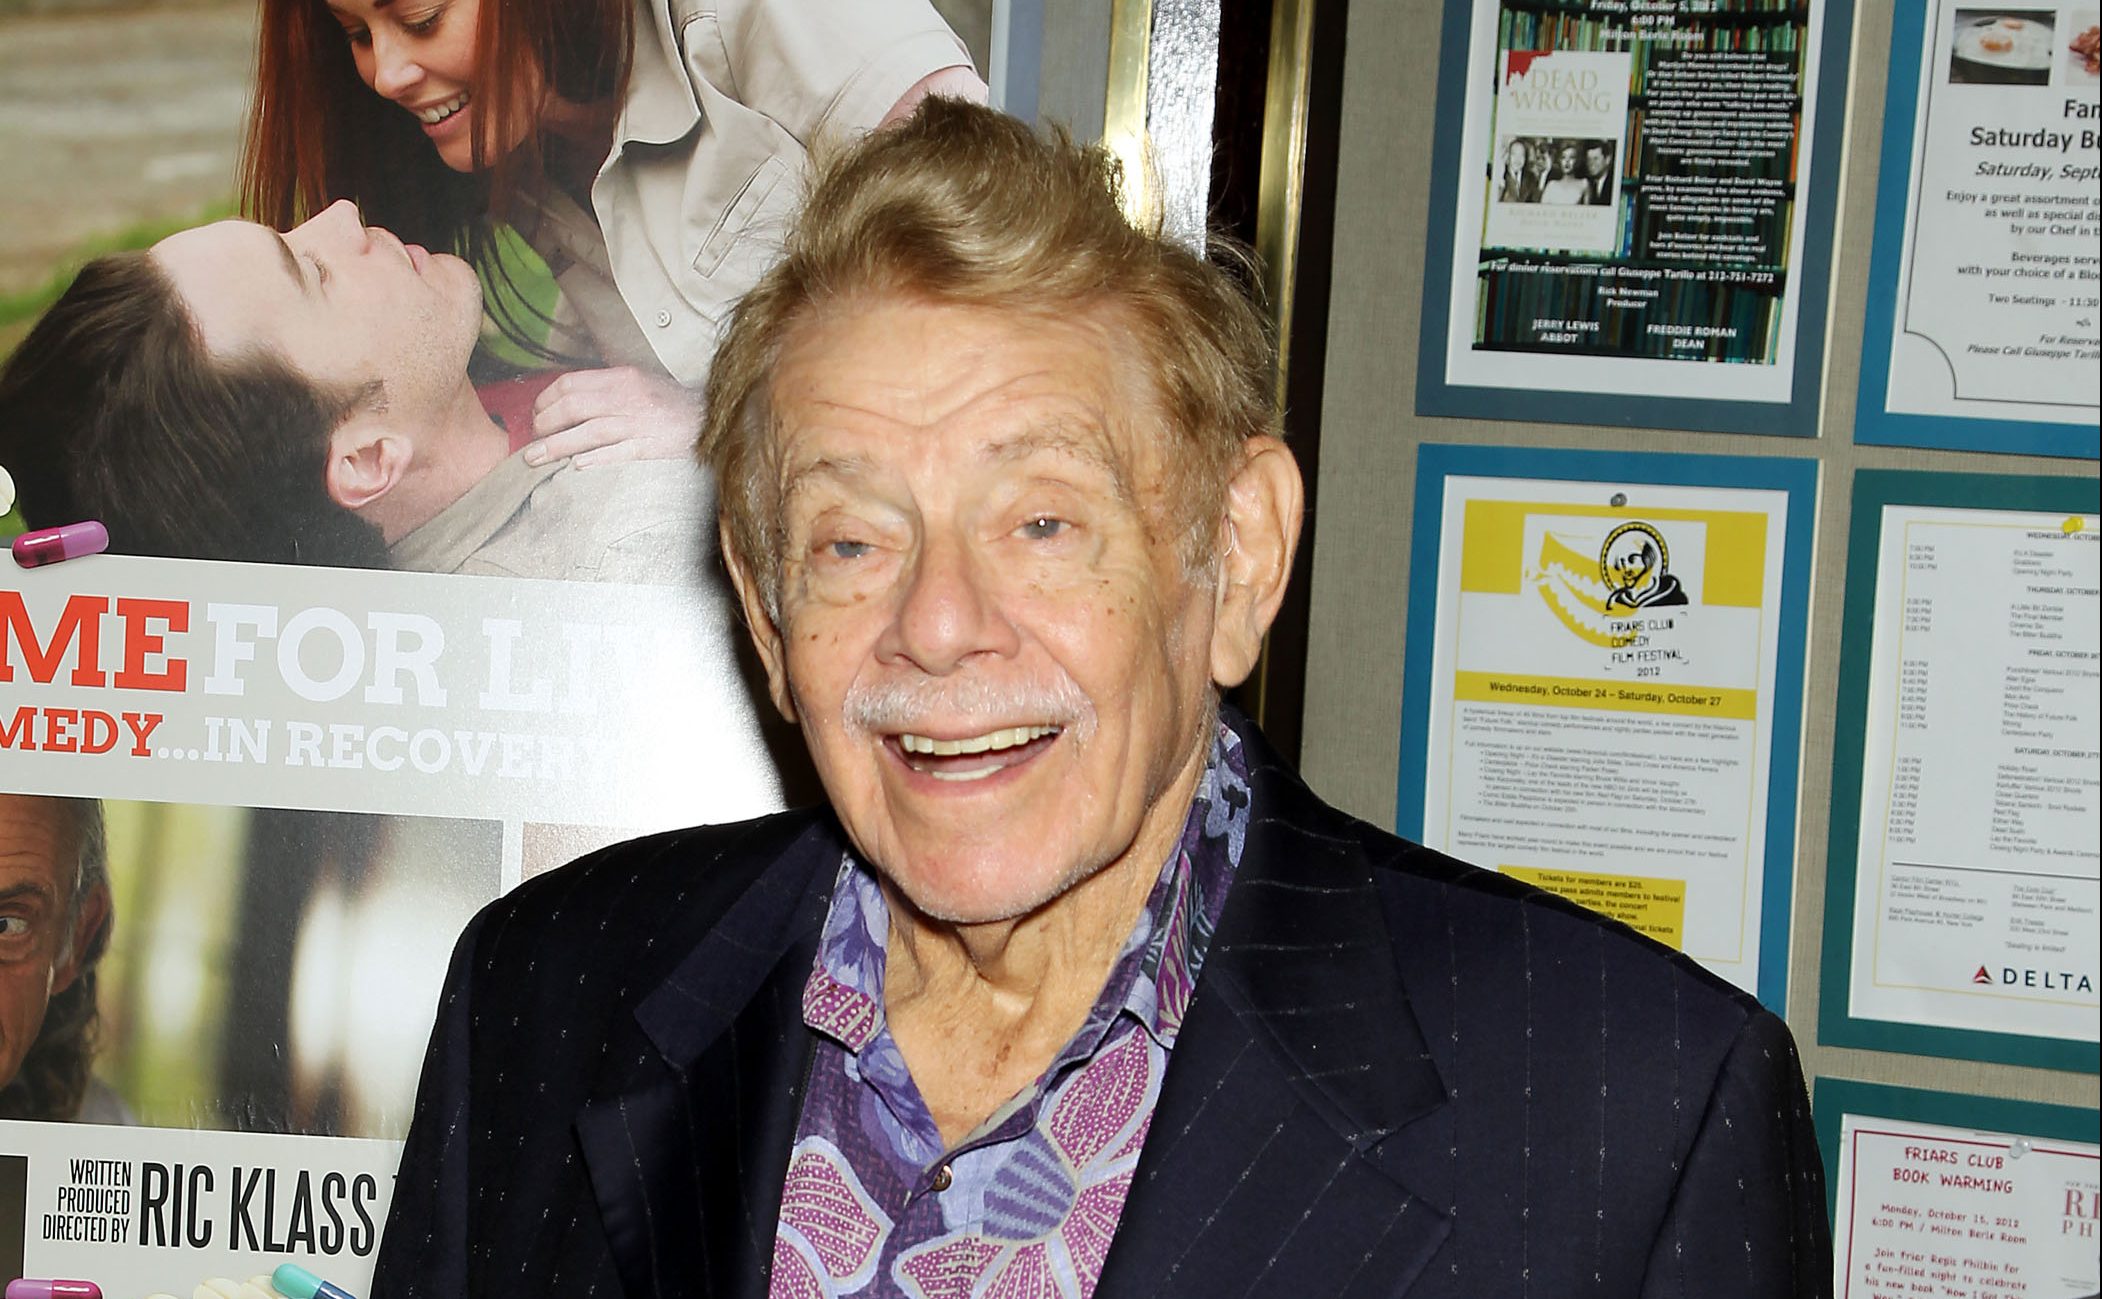 Jerry Stiller, comedian who played crotchety Frank Costanza on ‘Seinfeld,’ dies at 92